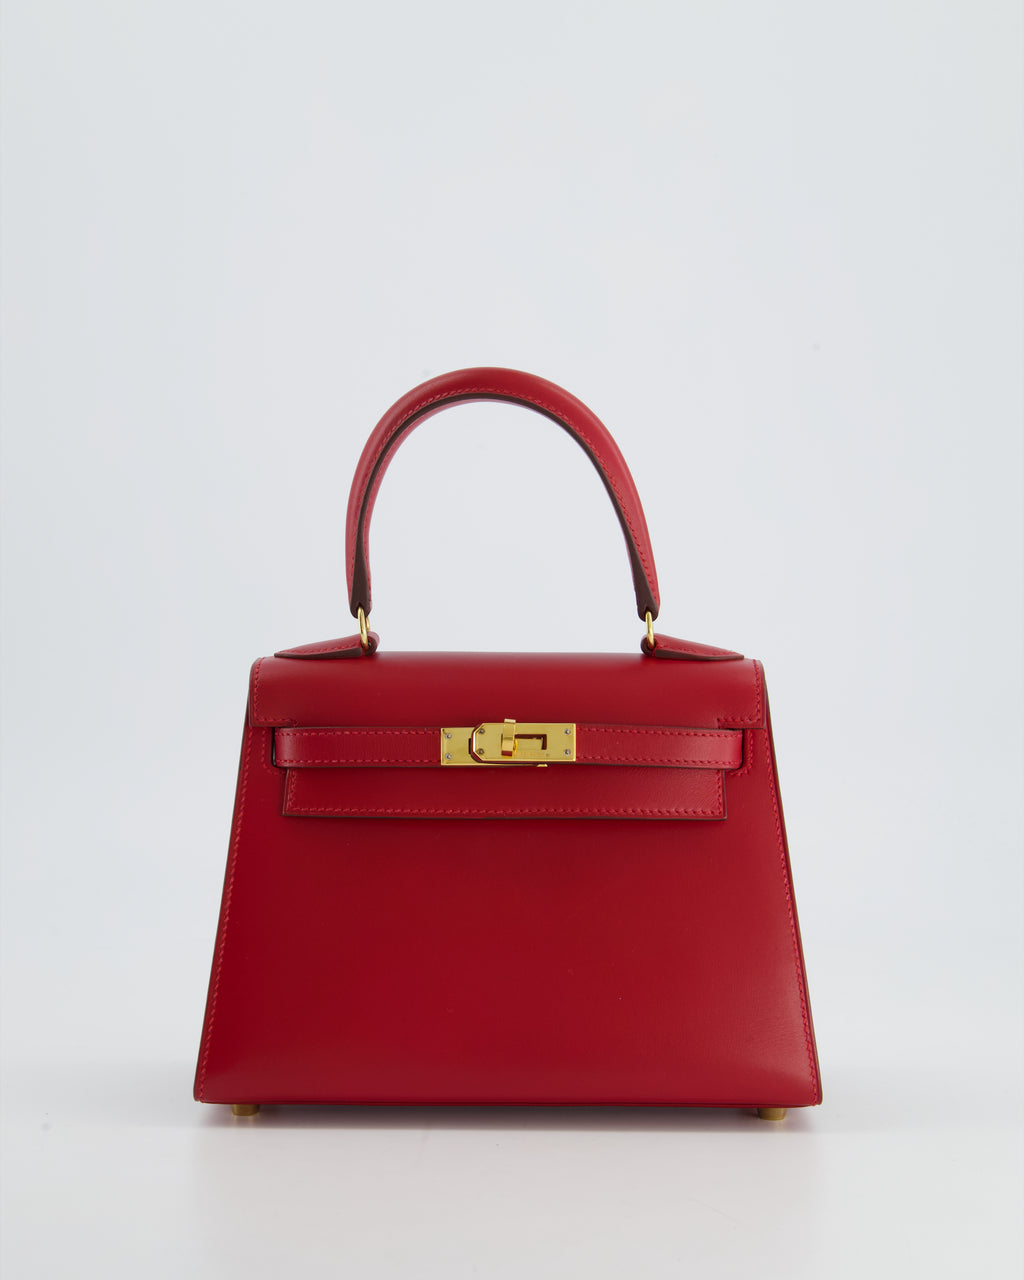 Super rare and very excellent condition Hermes kelly 20cm red Epsom ghw  #vintagekelly20 #vintagekelly #vintagehermes #glossvintage